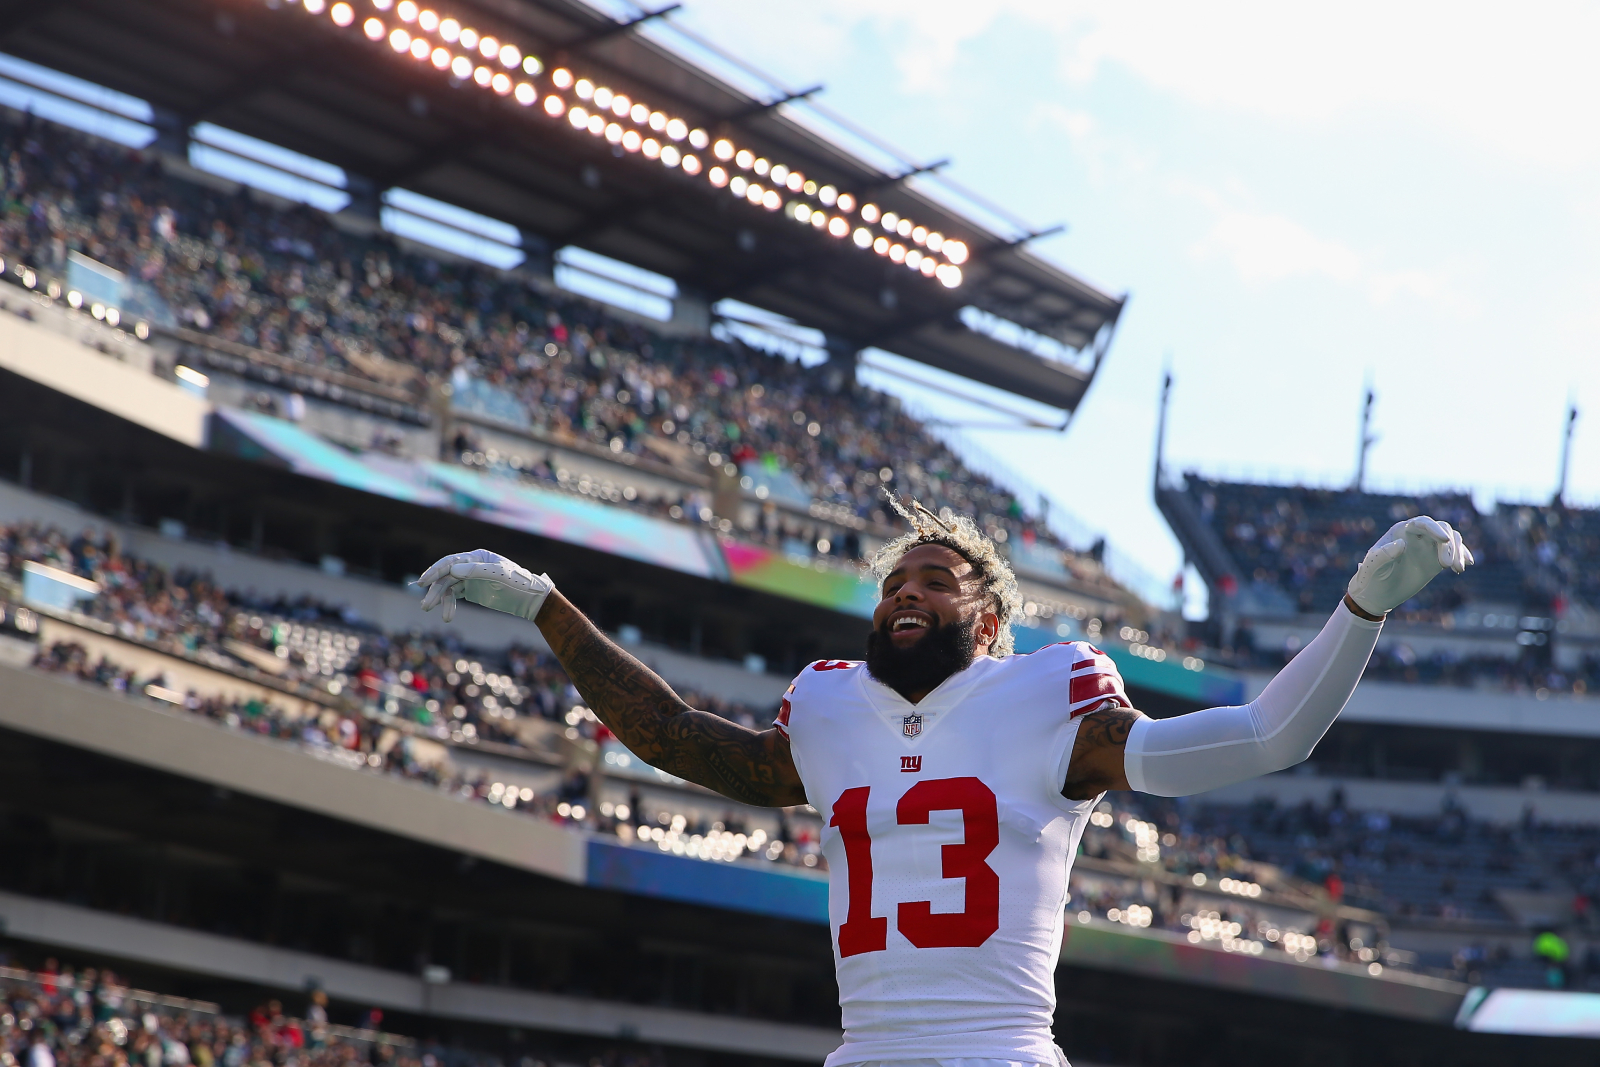 Odell Beckham Jr. was an excellent wide receiver for the New York Giants. However, he recently made revealing comments about his time there.